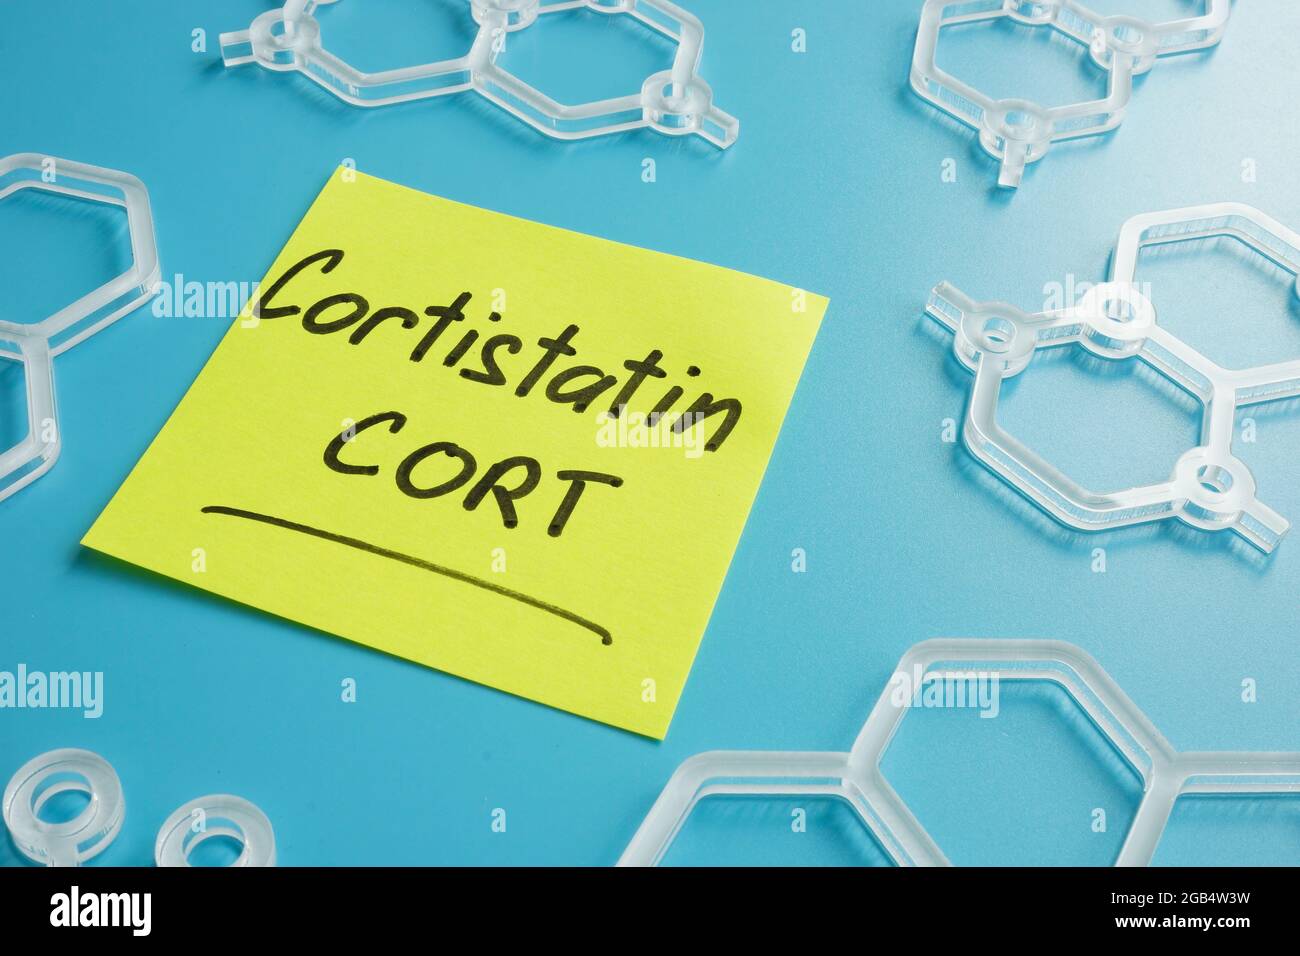 Cortistatin CORT written on the sticker and molecular models. Stock Photo